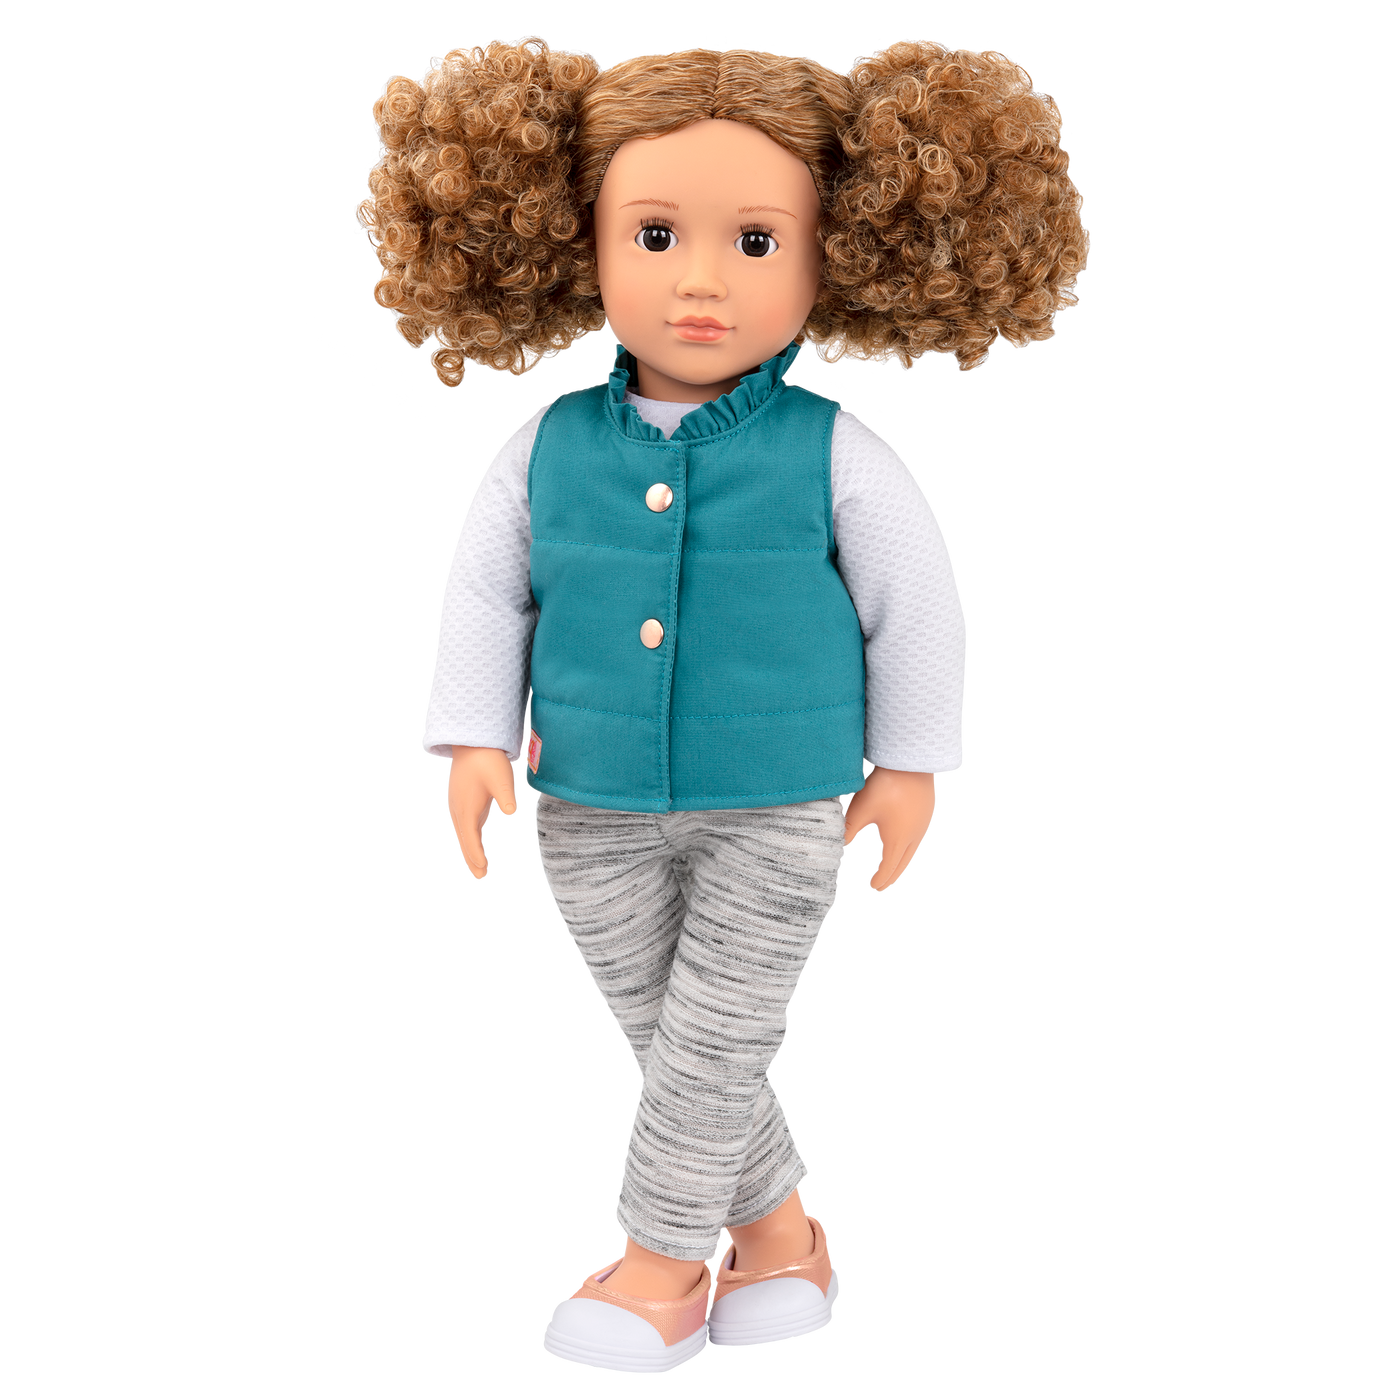 18-inch doll wit light-brown hair and brown eyes